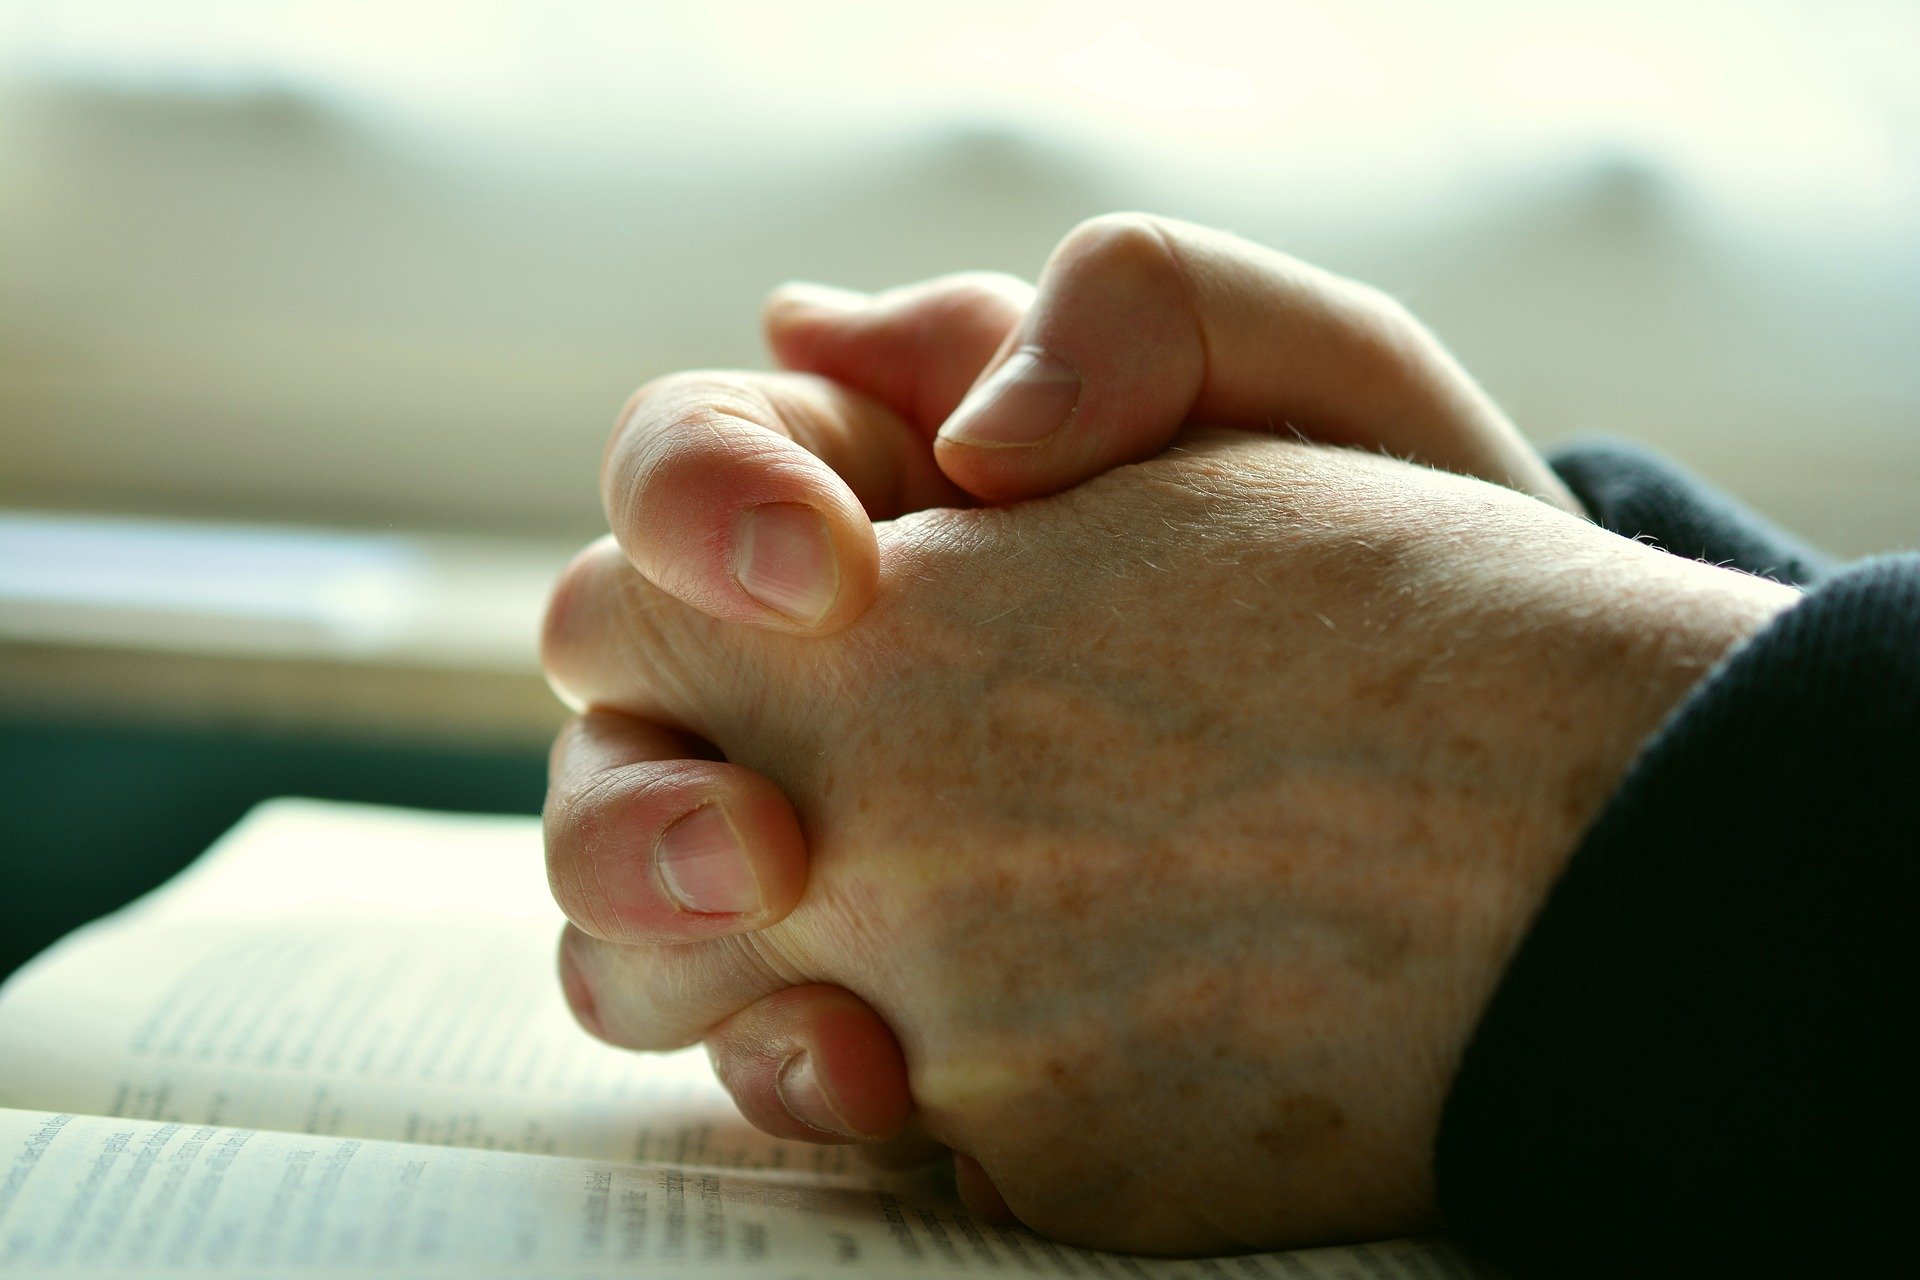 A stock image of a man's hands clasped in prayer/praying.